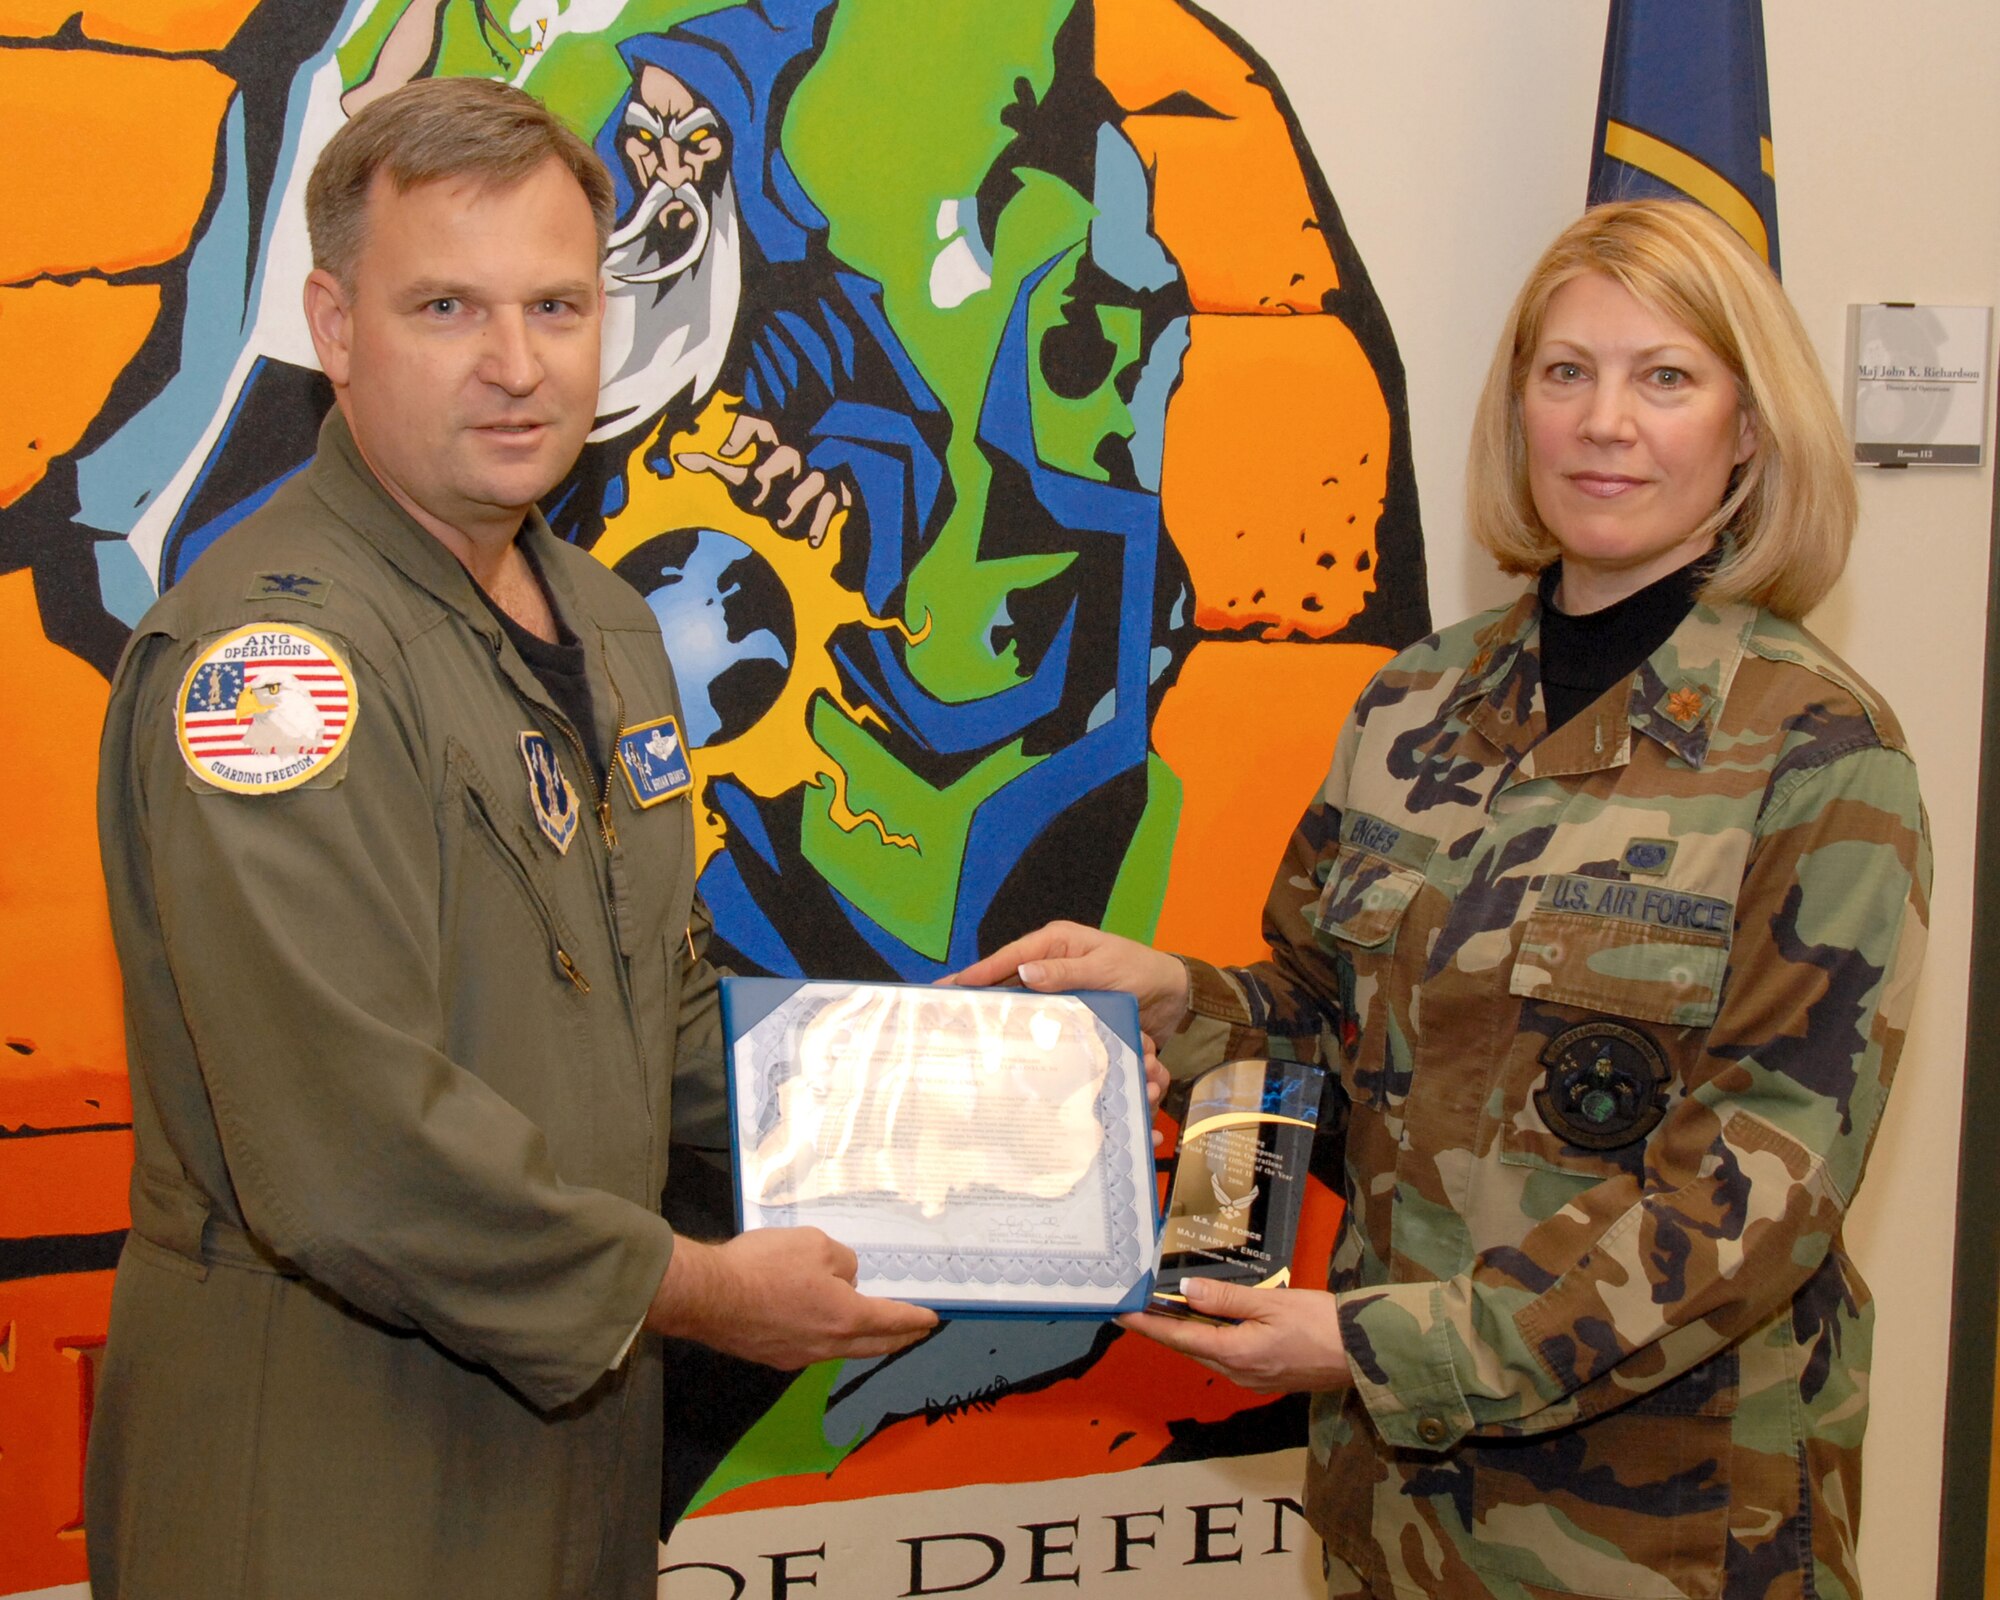 SALT LAKE CITY - Maj. Mary Enges of the 101st Information Warfare Flight is presented the Outstanding Air Force Information Operations Award Air Reserve Component Field Grade Officer of the Year, Level II by Col. Brian Dravis, deputy director of operations at the National Guard Bureau in Washington, D.C. during the June 2007 UTA drill. (USAF photo by Tech. Sgt. Mike Evans)